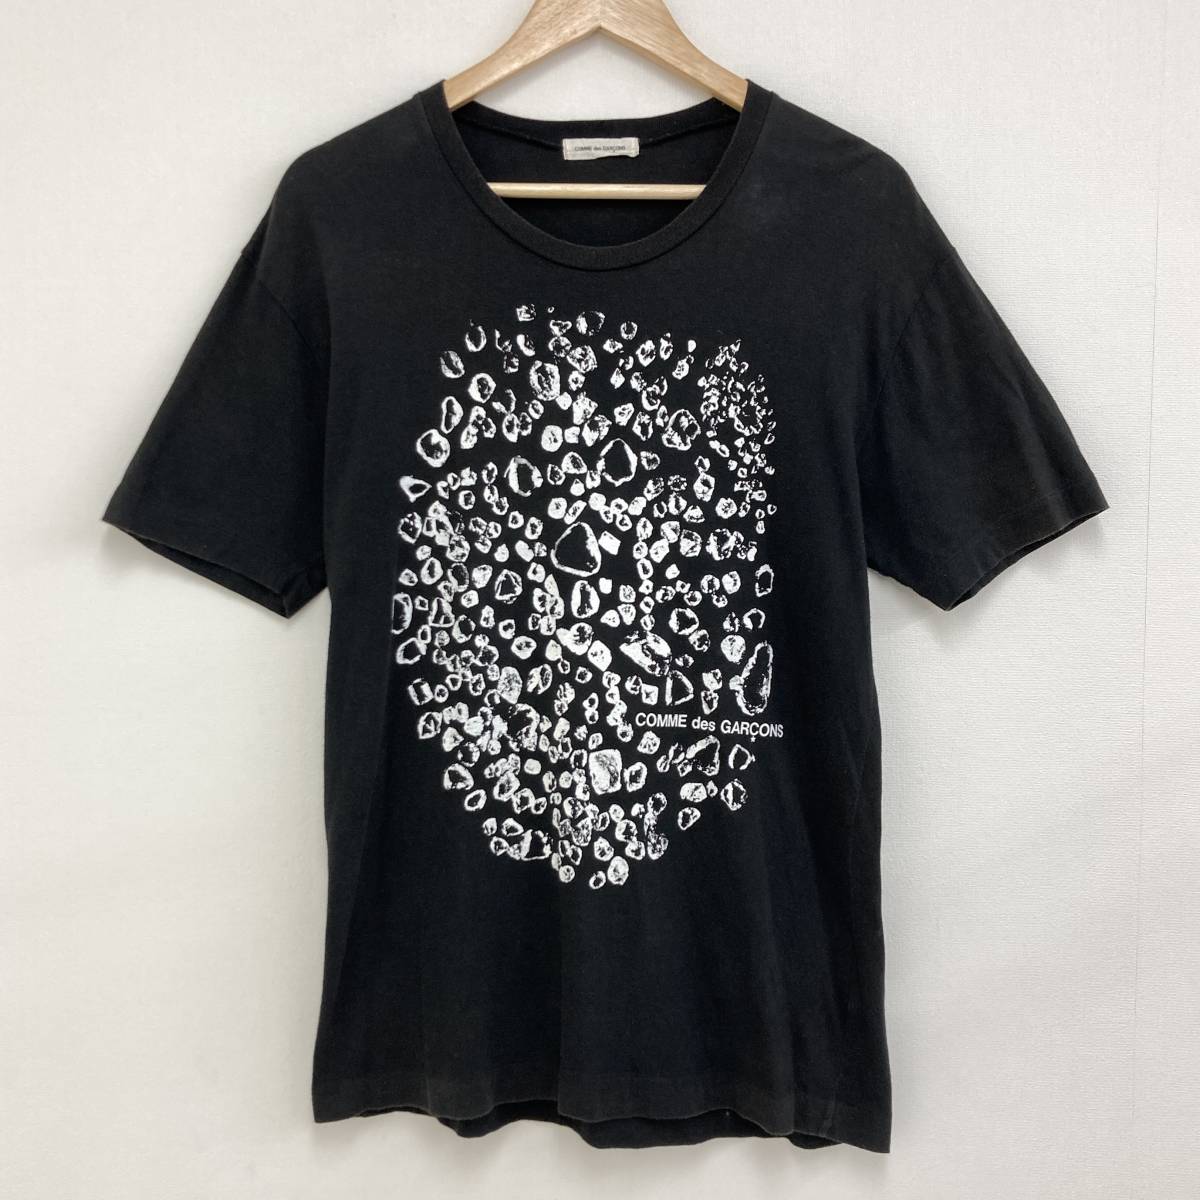 AD1990 COMME des GARCONS 半袖 Tシャツ ブラック 黒 コムデギャルソン カットソー Tee VINTAGE archive 3060243